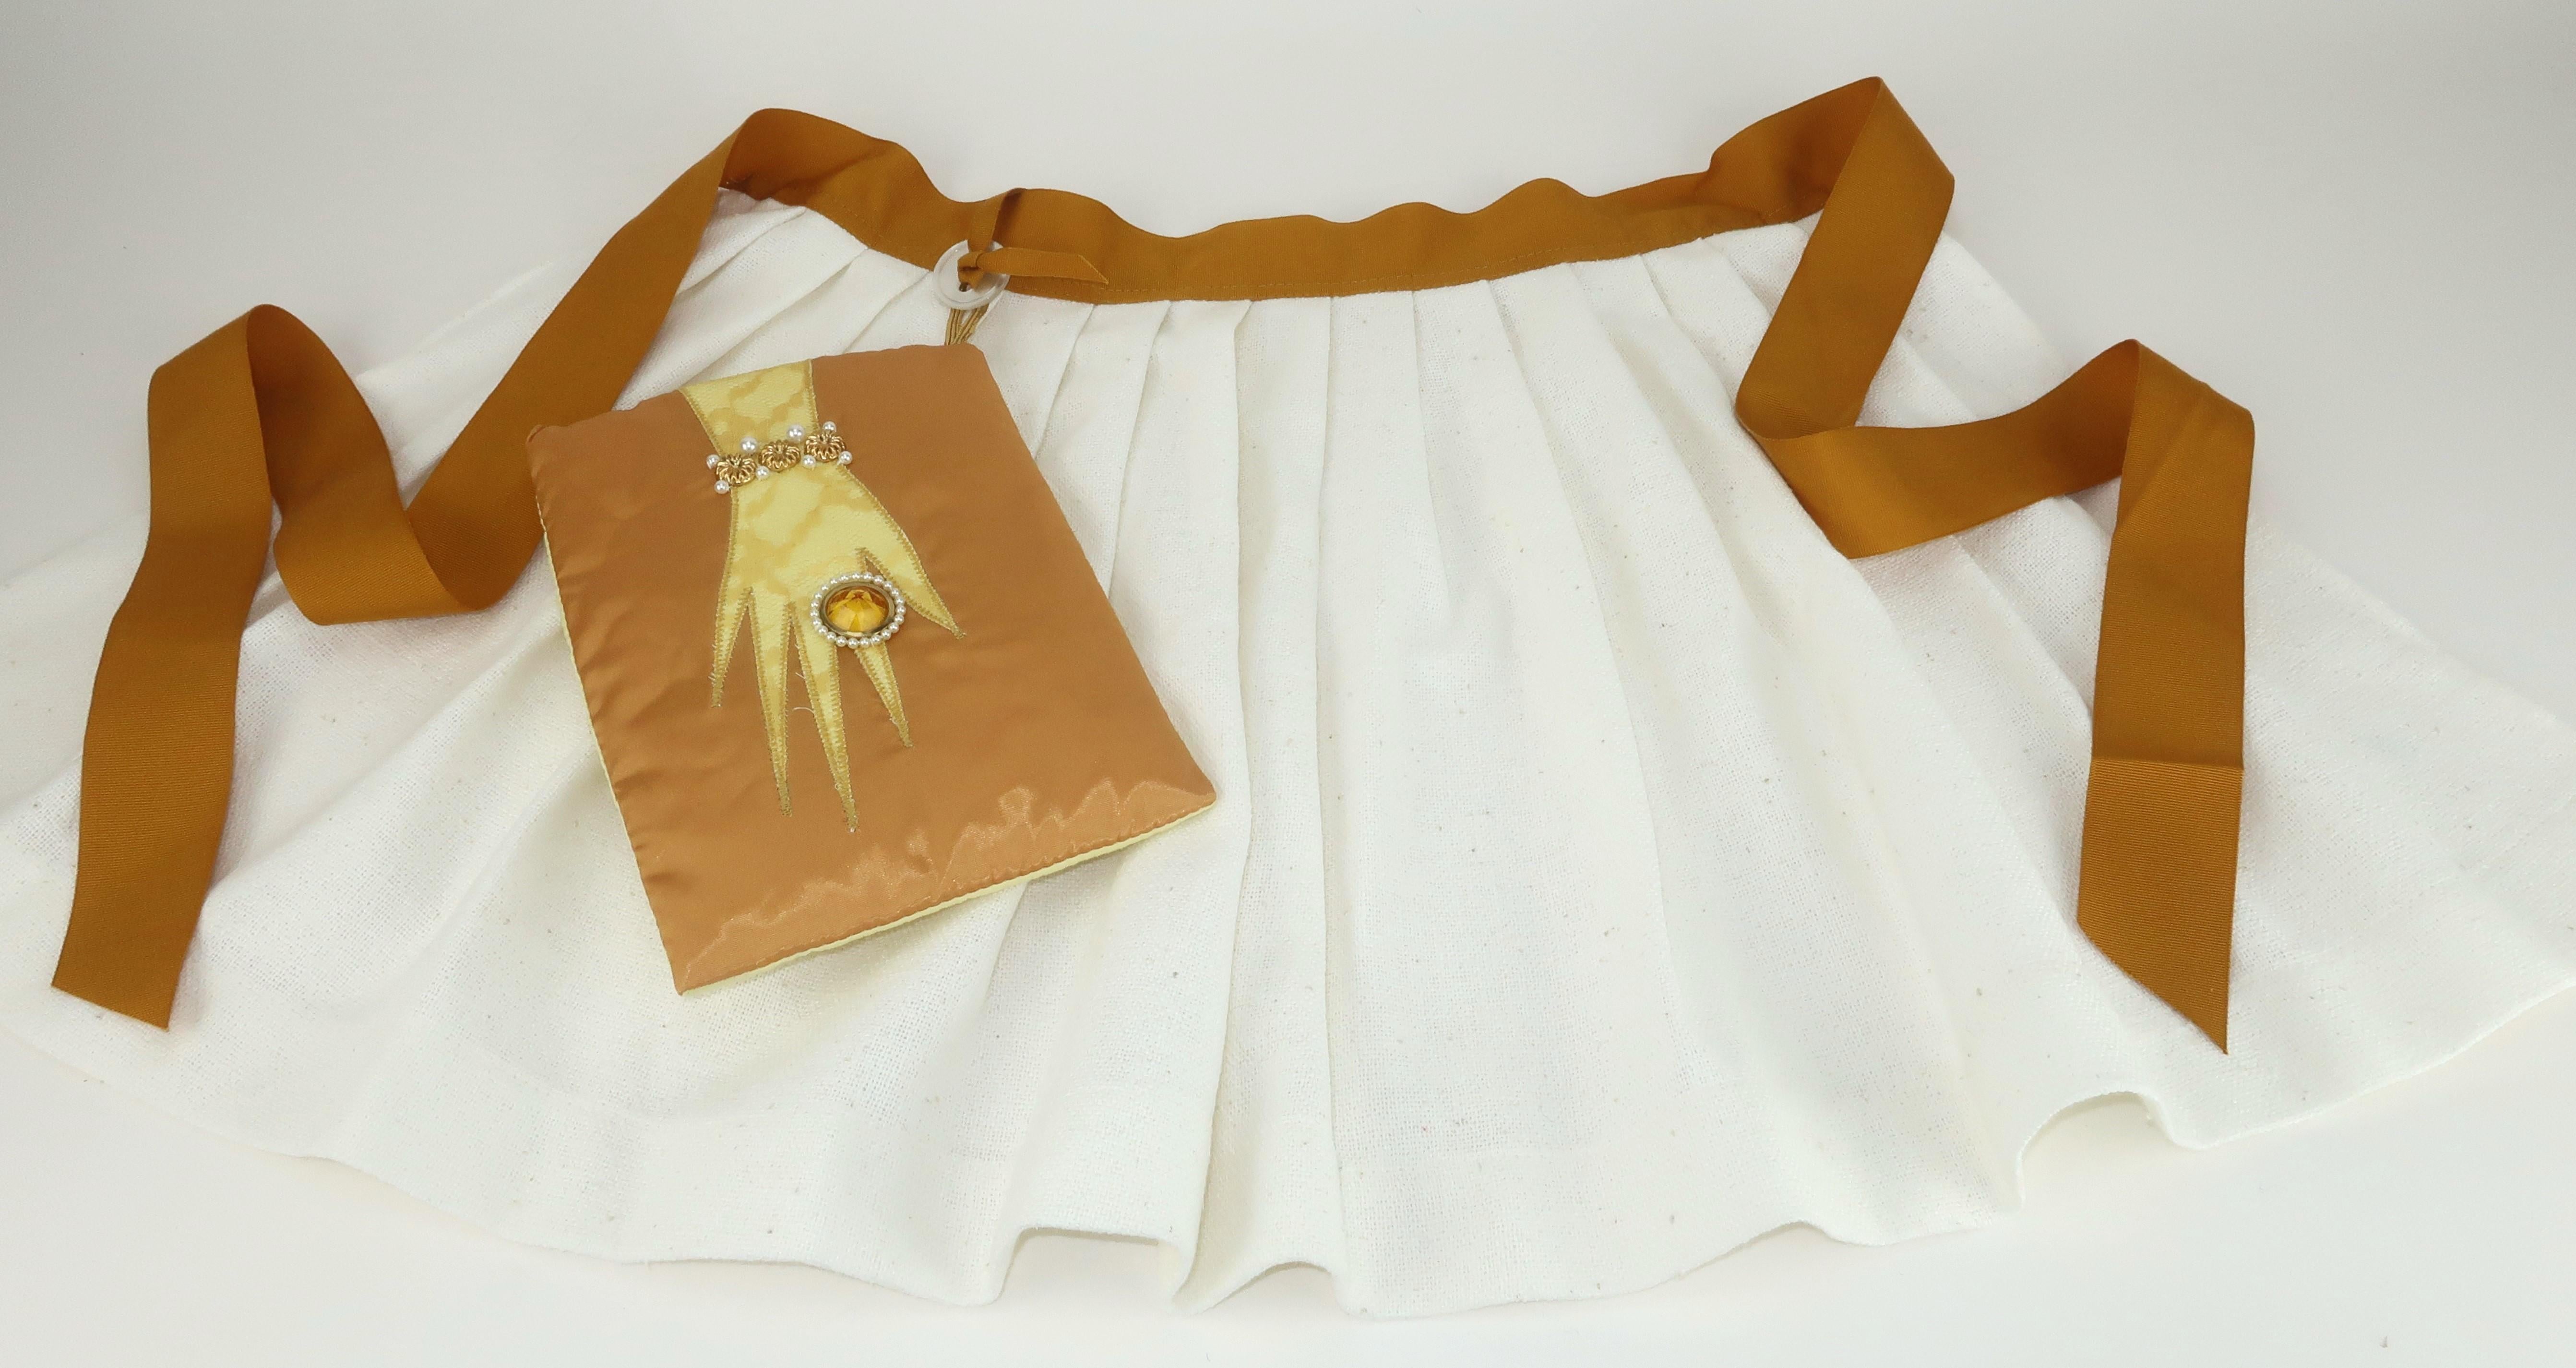 For the hostess with the mostest!  Glam C.1960 pleated apron and attached oven mitt embellished with a stylized hand.  The apron is a bleached burlap trimmed in golden yellow grosgrain ribbon.  The satin oven mitt attaches with a button at the waist